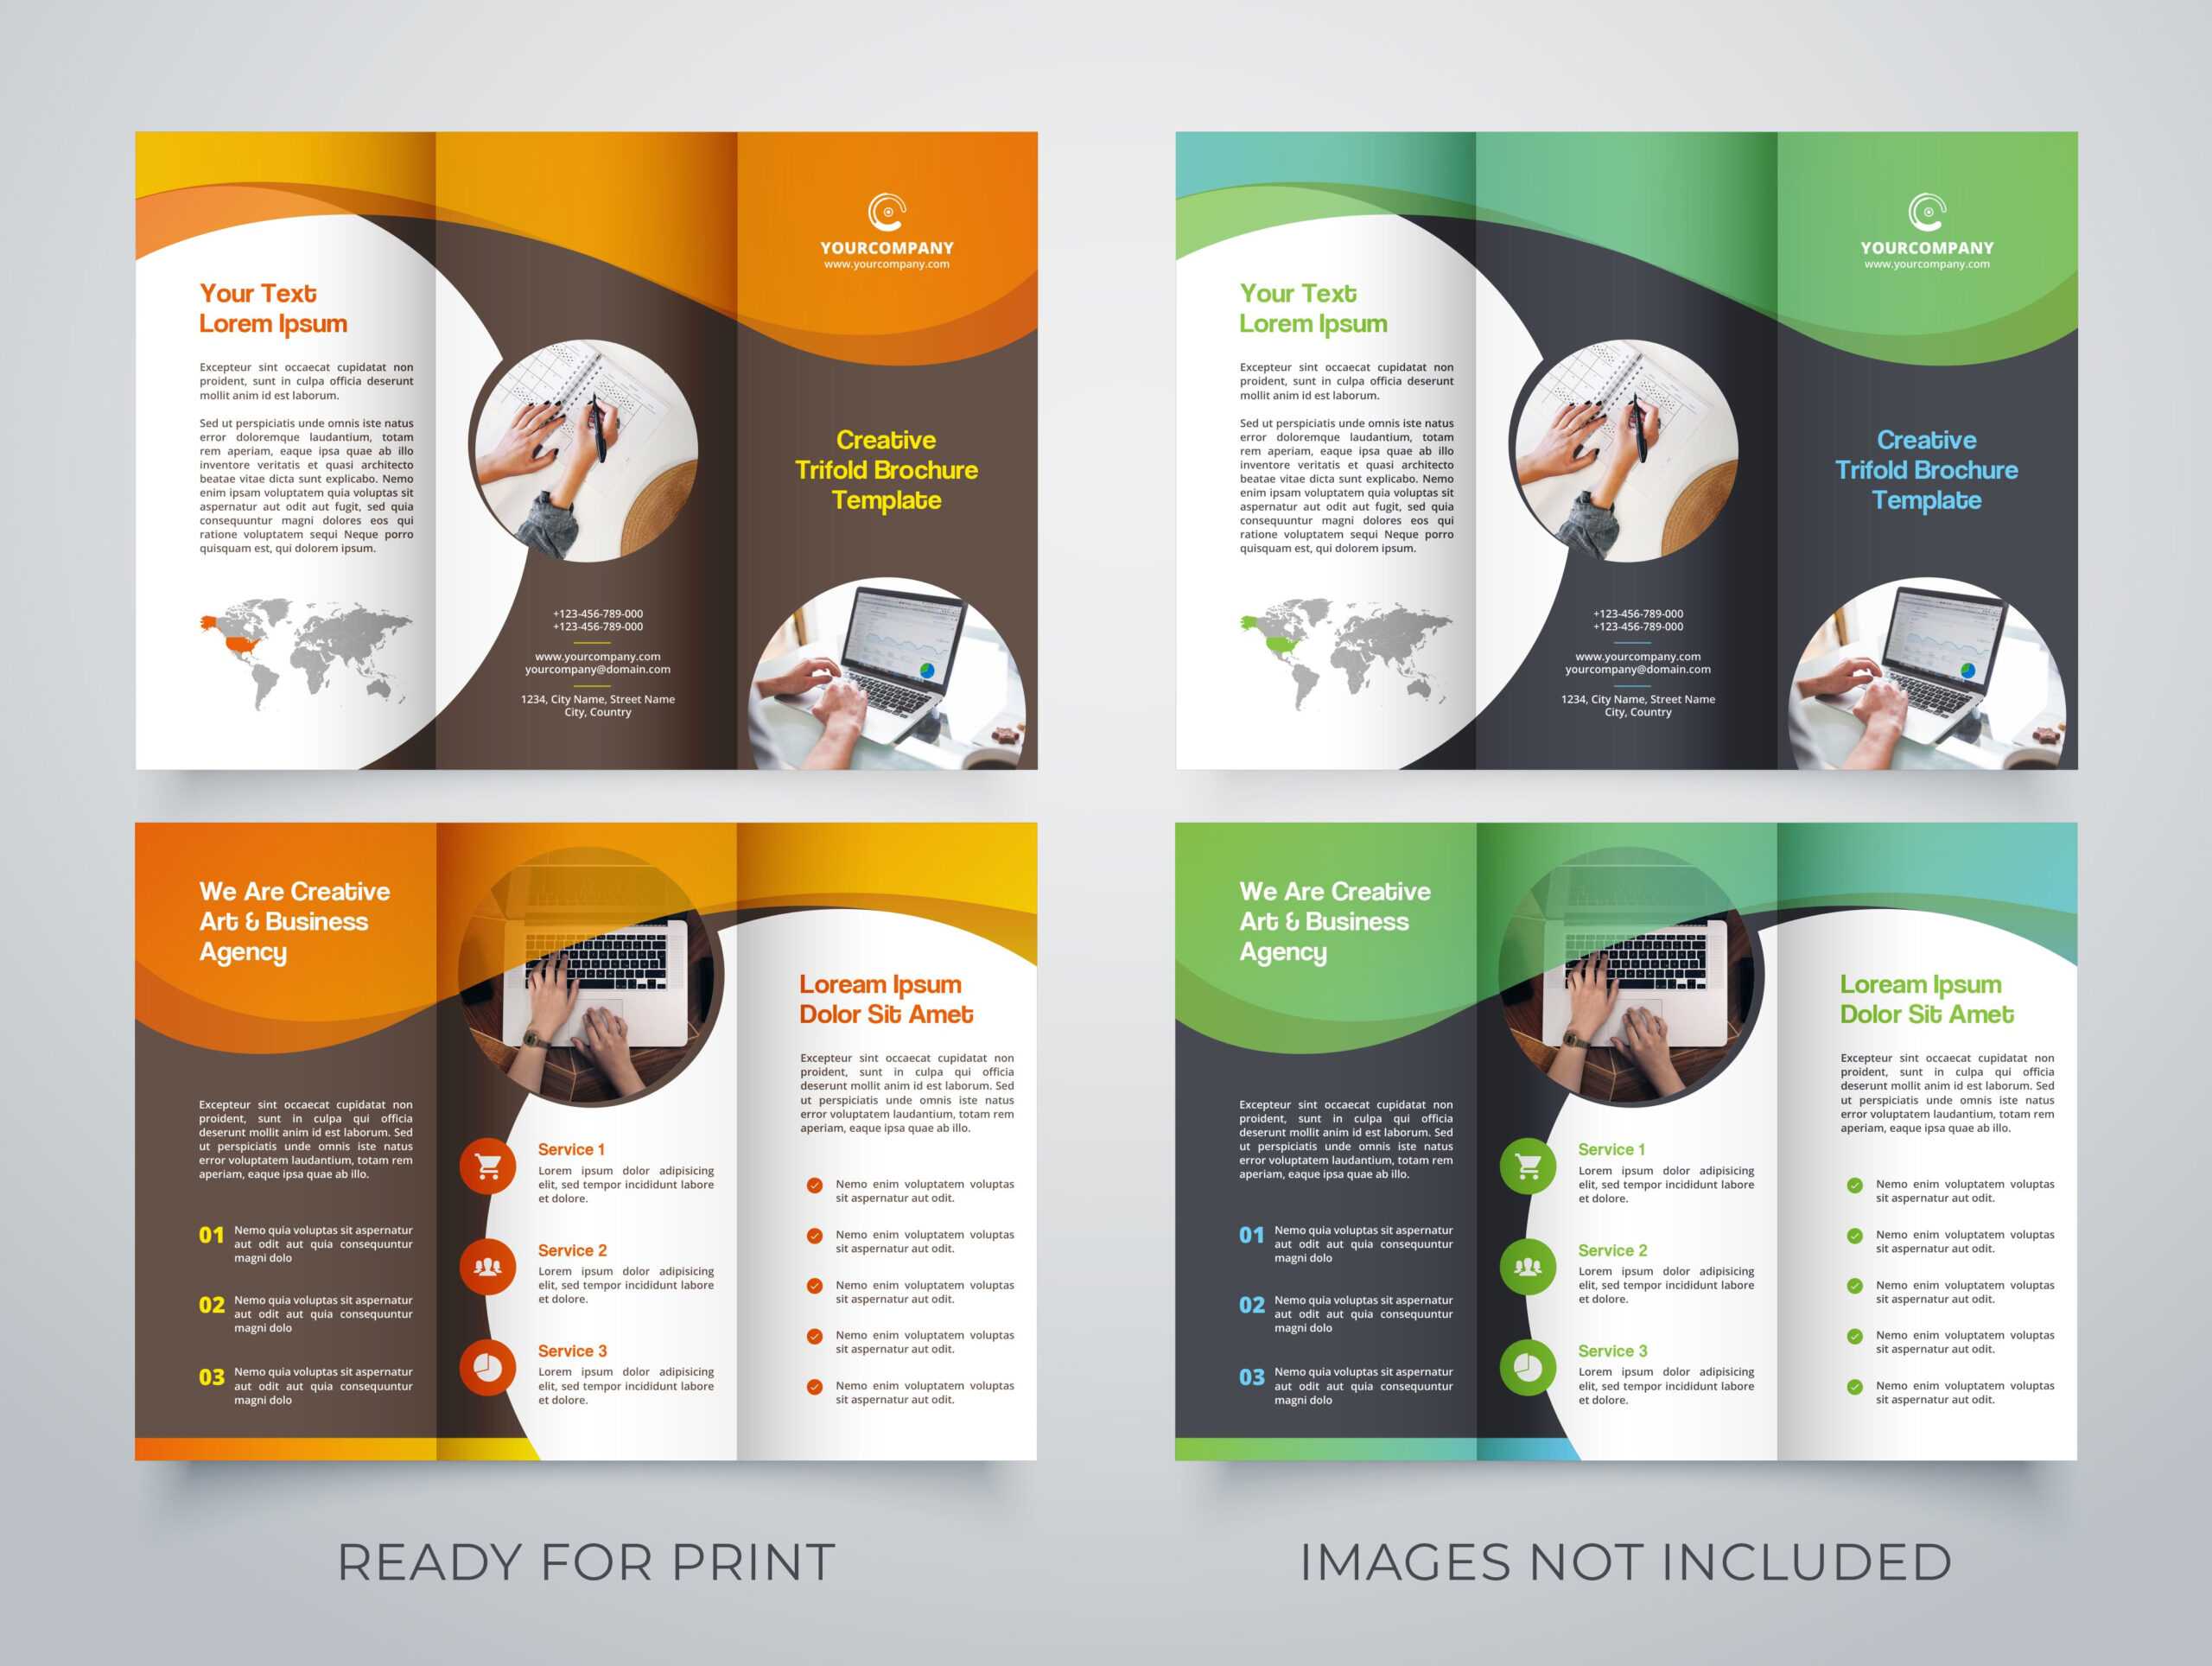 Creative Trifold Brochure Template. 2 Color Styles №80614 Within Membership Brochure Template